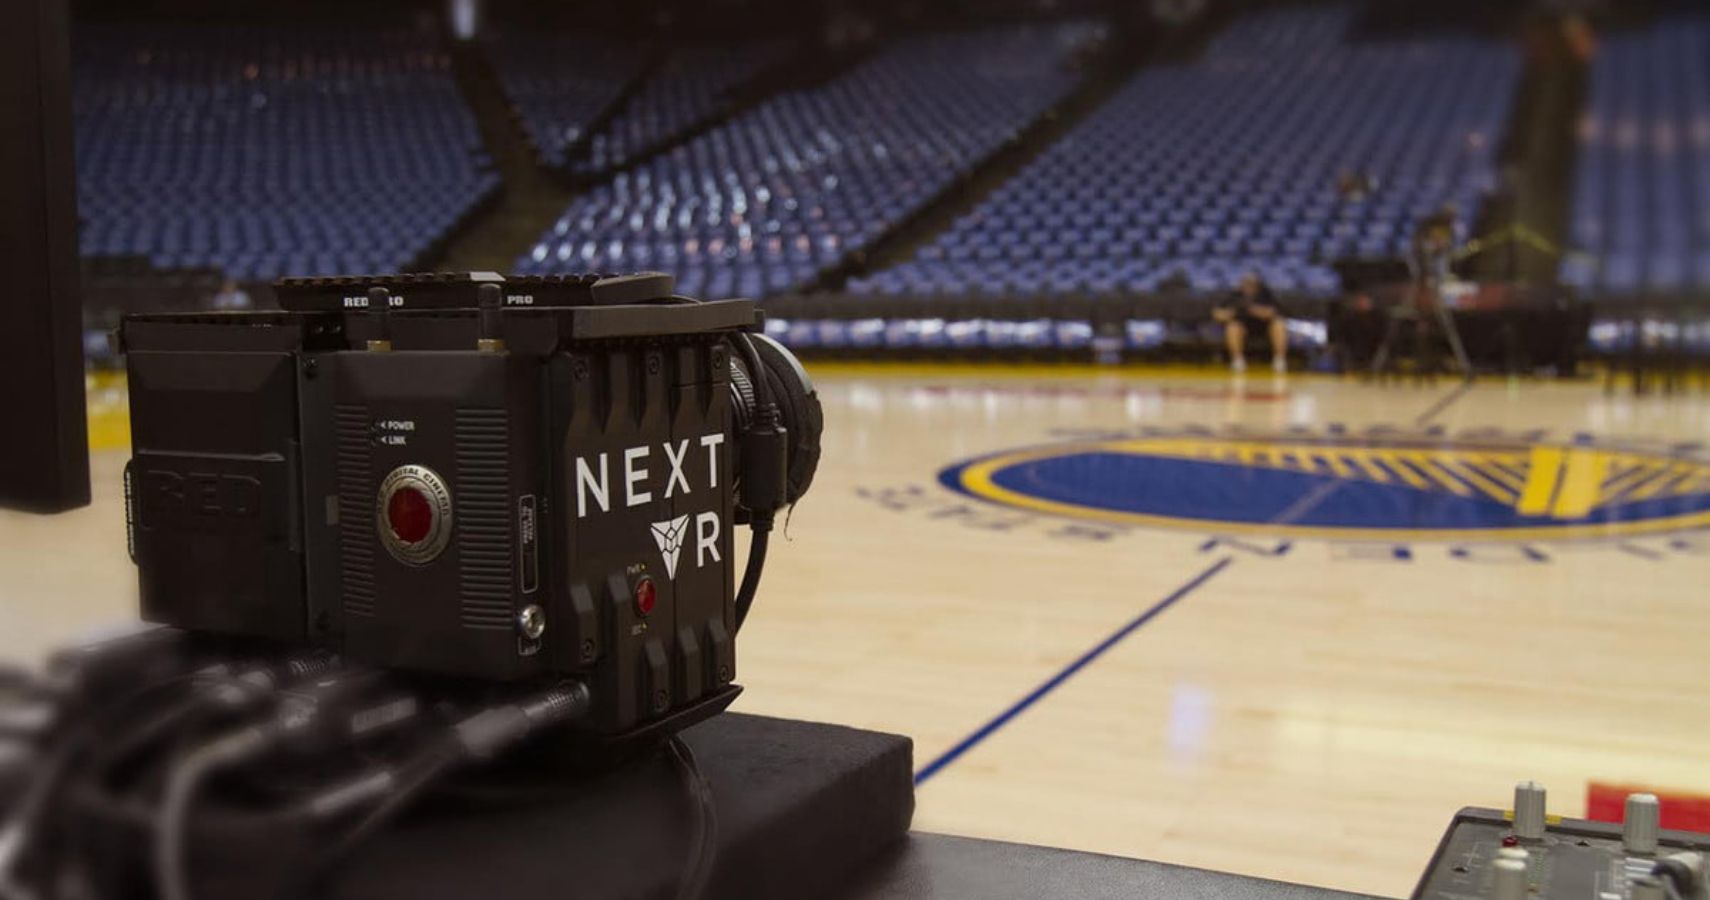 Twitter will stream live NBA games with a camera that tracks one